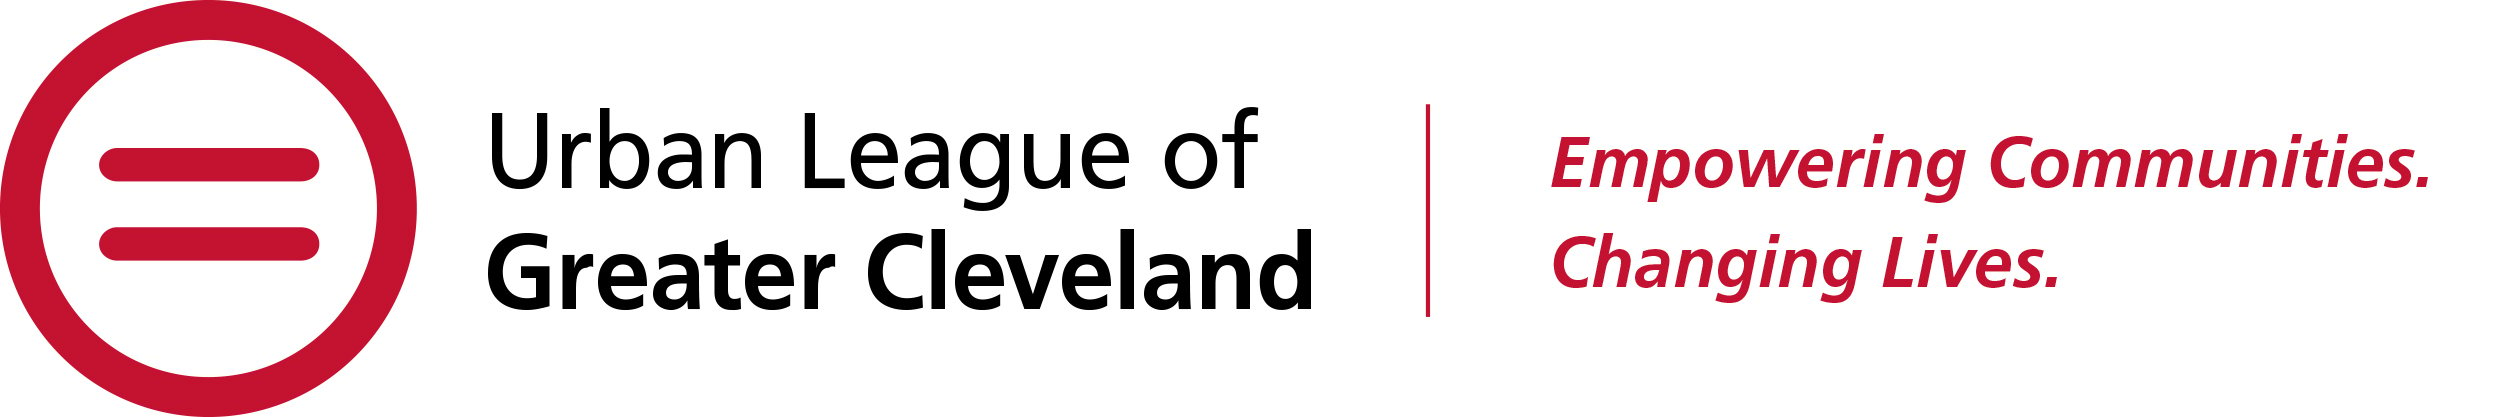 Urban League of Greater Cleveland logo